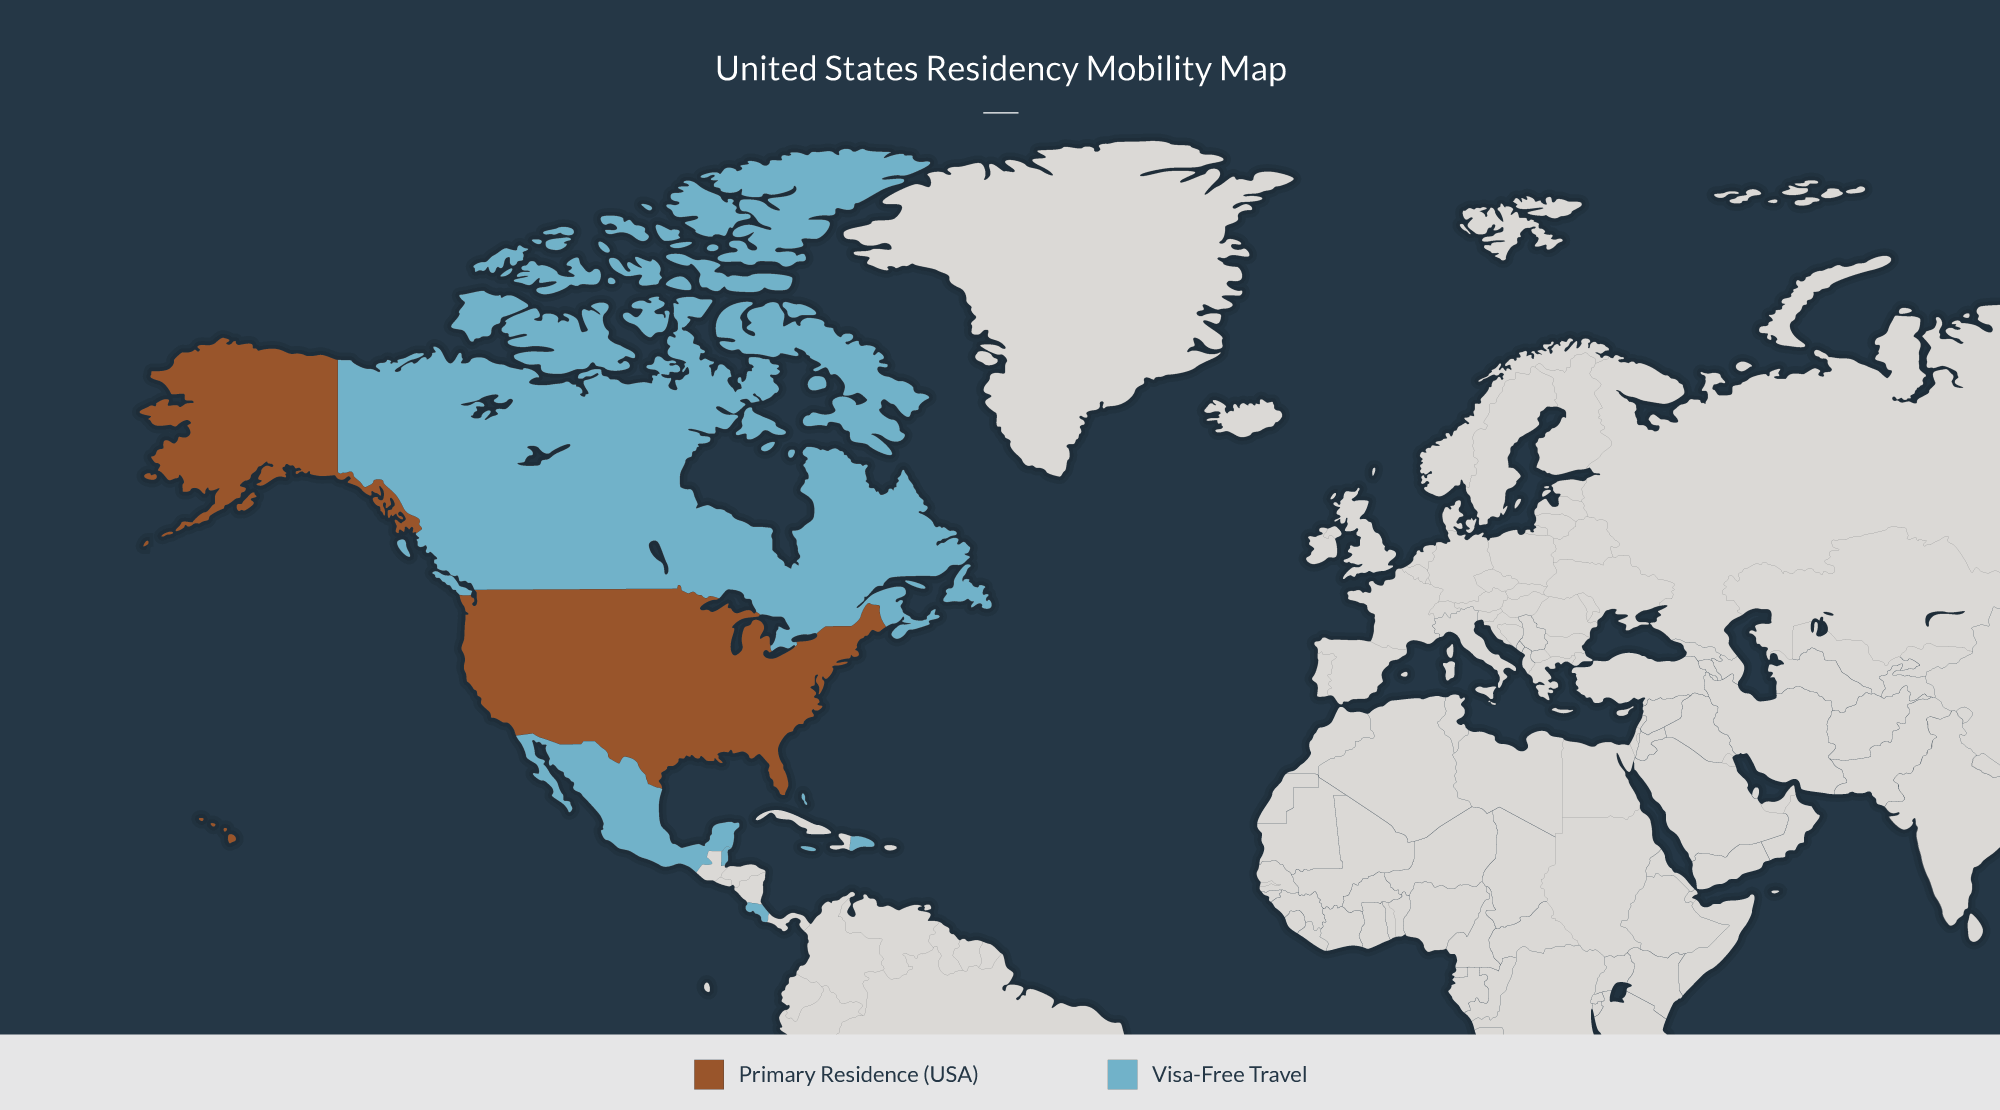 USA residency mobility map: Primary residence in USA, Visa-free travel to Canada, Mexico, and other nearby countries.